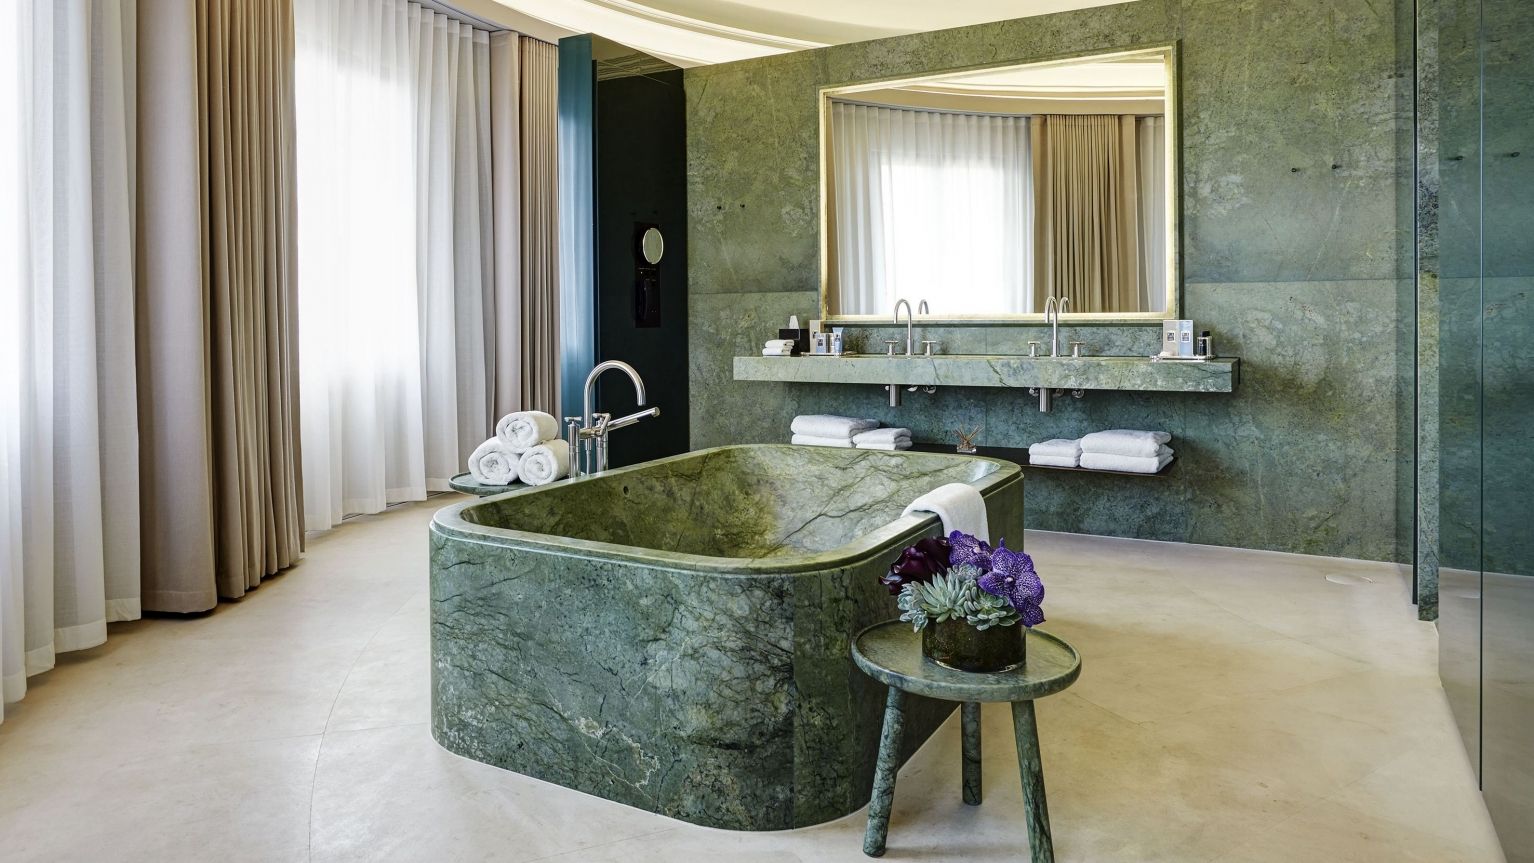 Dome penthouse hotel cafe royal london bathroom green marble